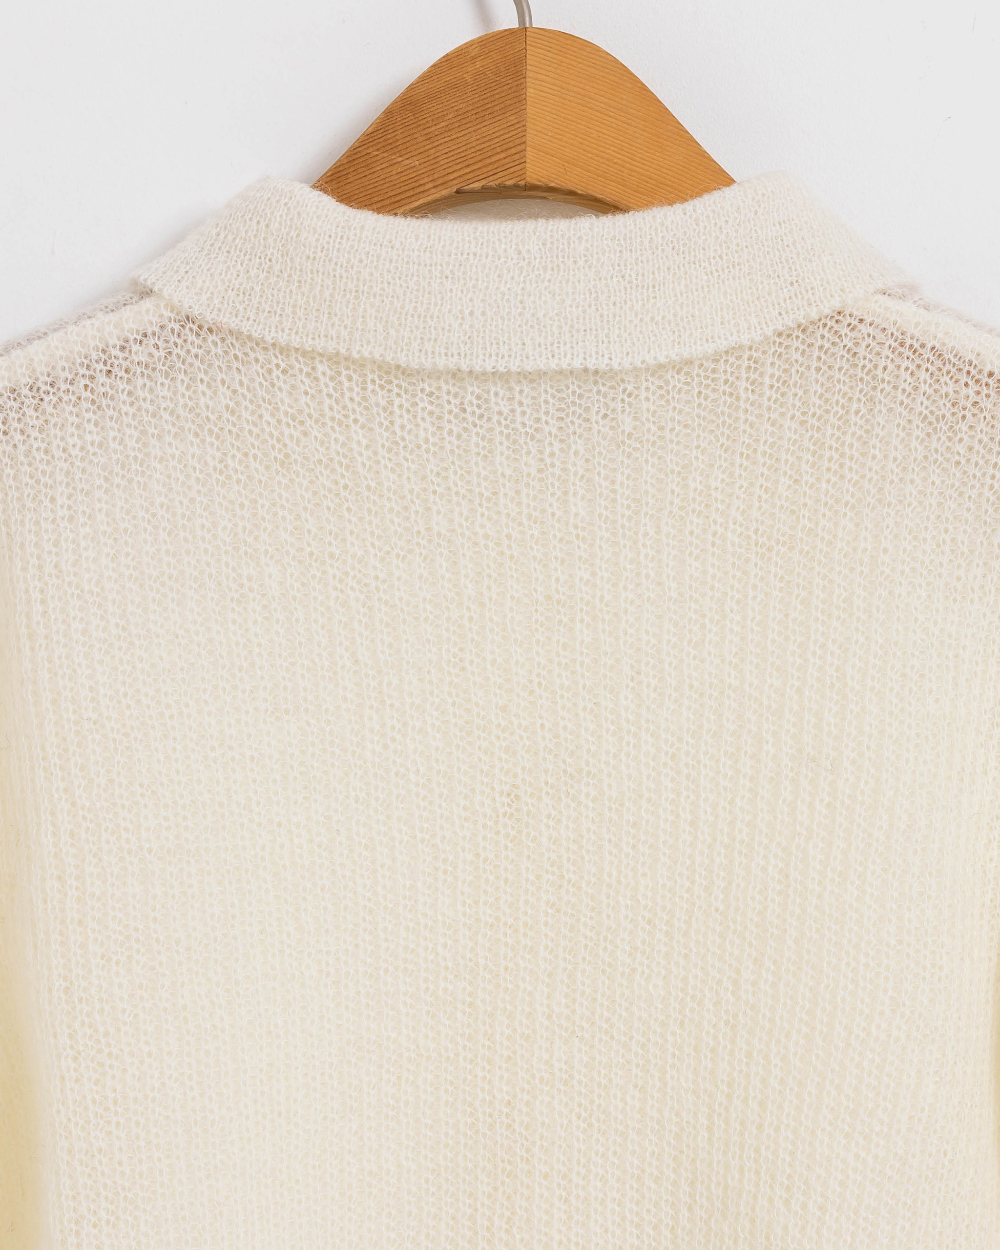 long sleeved tee detail image-S1L38